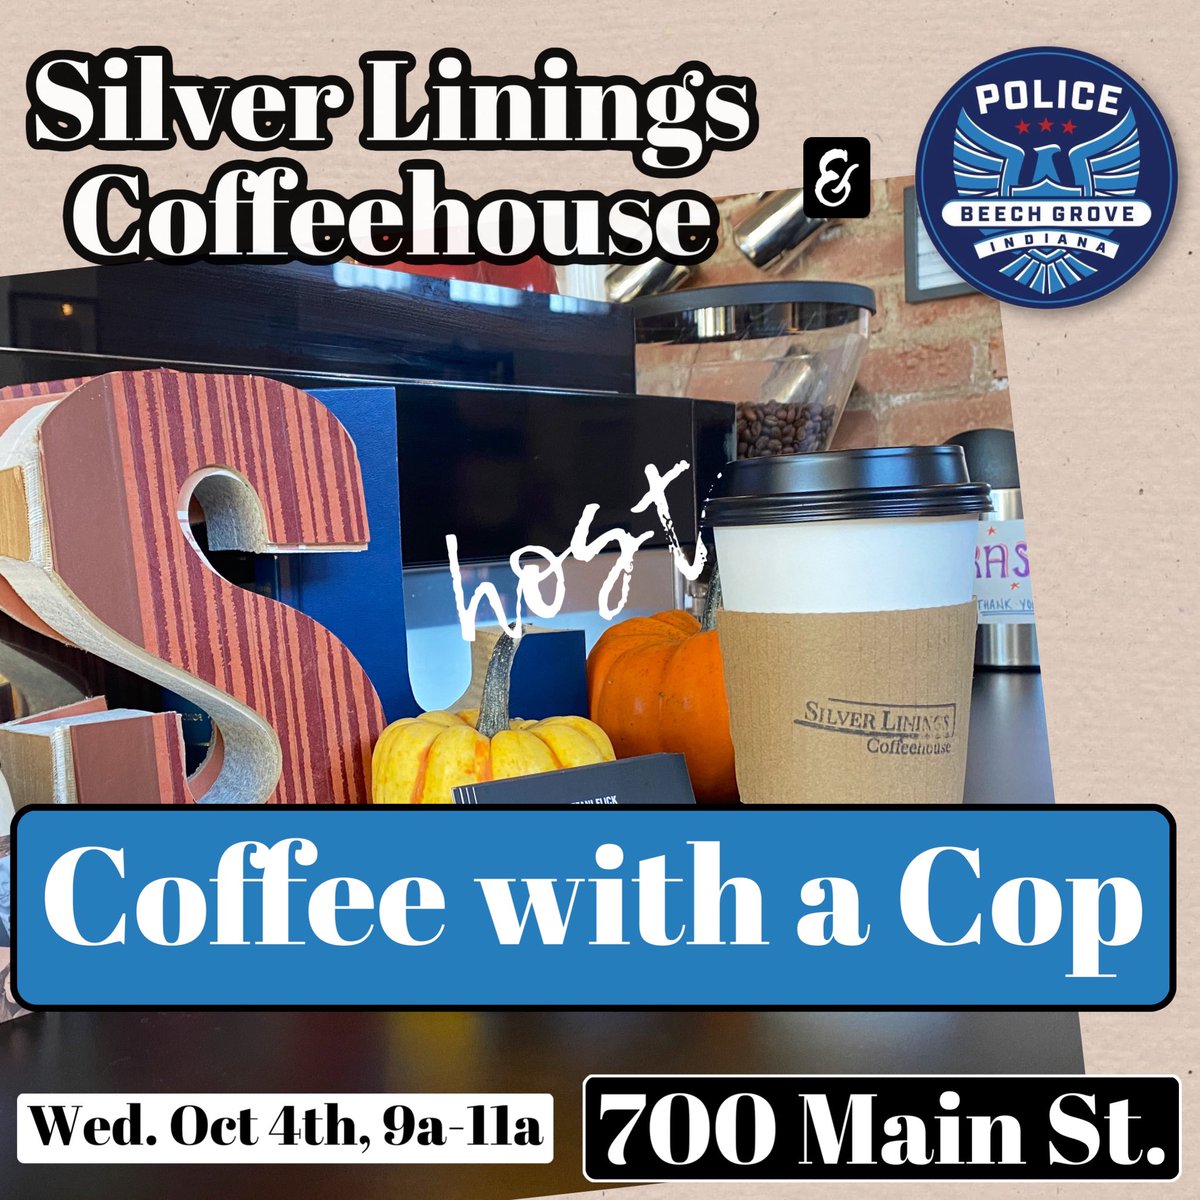 Coffee with a Cop at Silver Linings Coffeehouse. Wed. Oct. 4th, 9a-11a - 700 Main Street. This is a great casual event with Beech Grove Officers and Admin getting an opportunity to know you, answer questions, and hear any concerns! Plus drink some fine coffee! #coffeewithacop